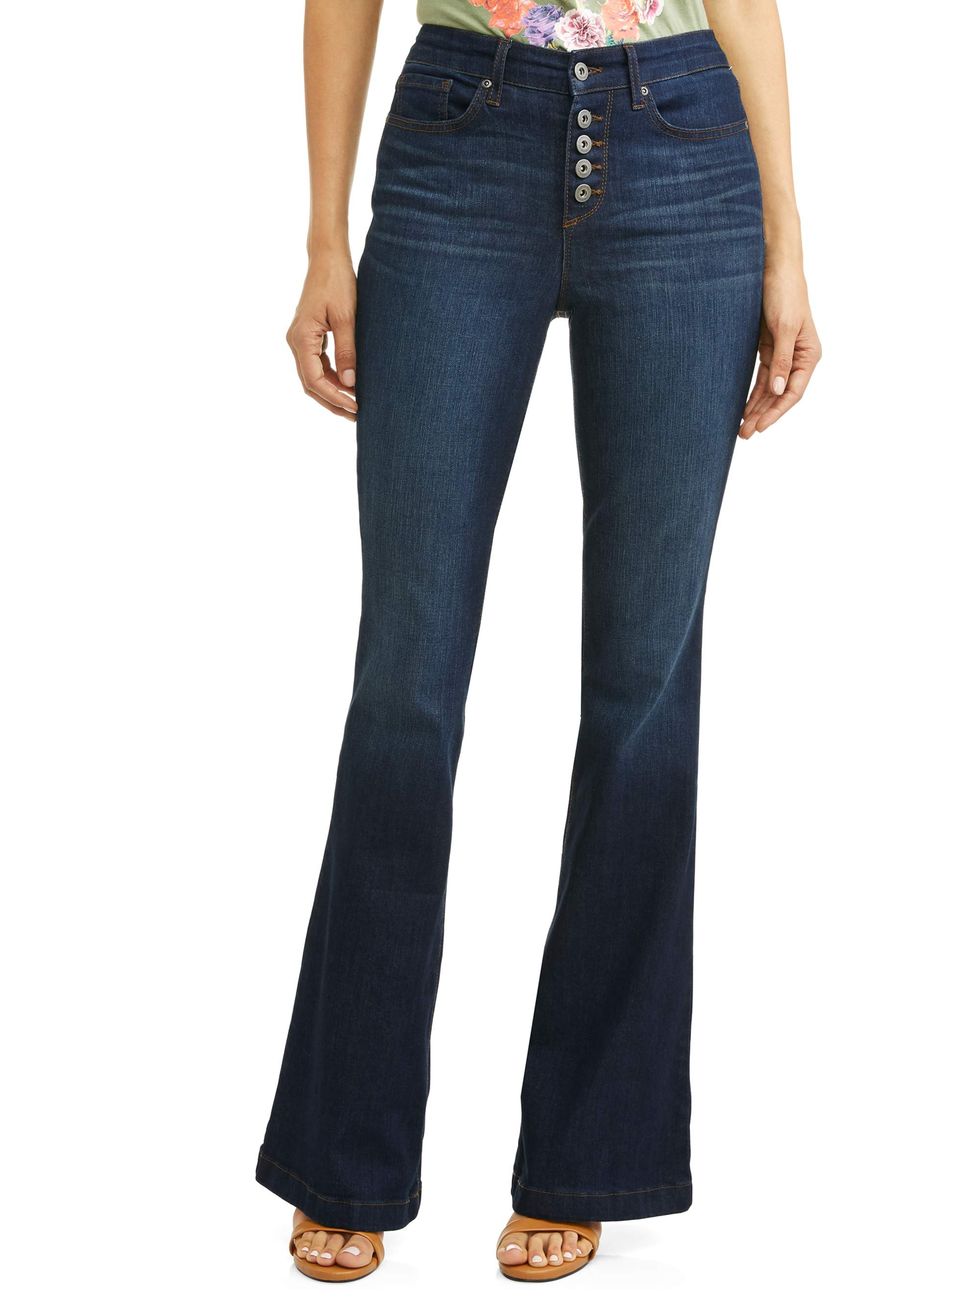 Sofía Vergara's jeans are on sale for as low as $7 right now